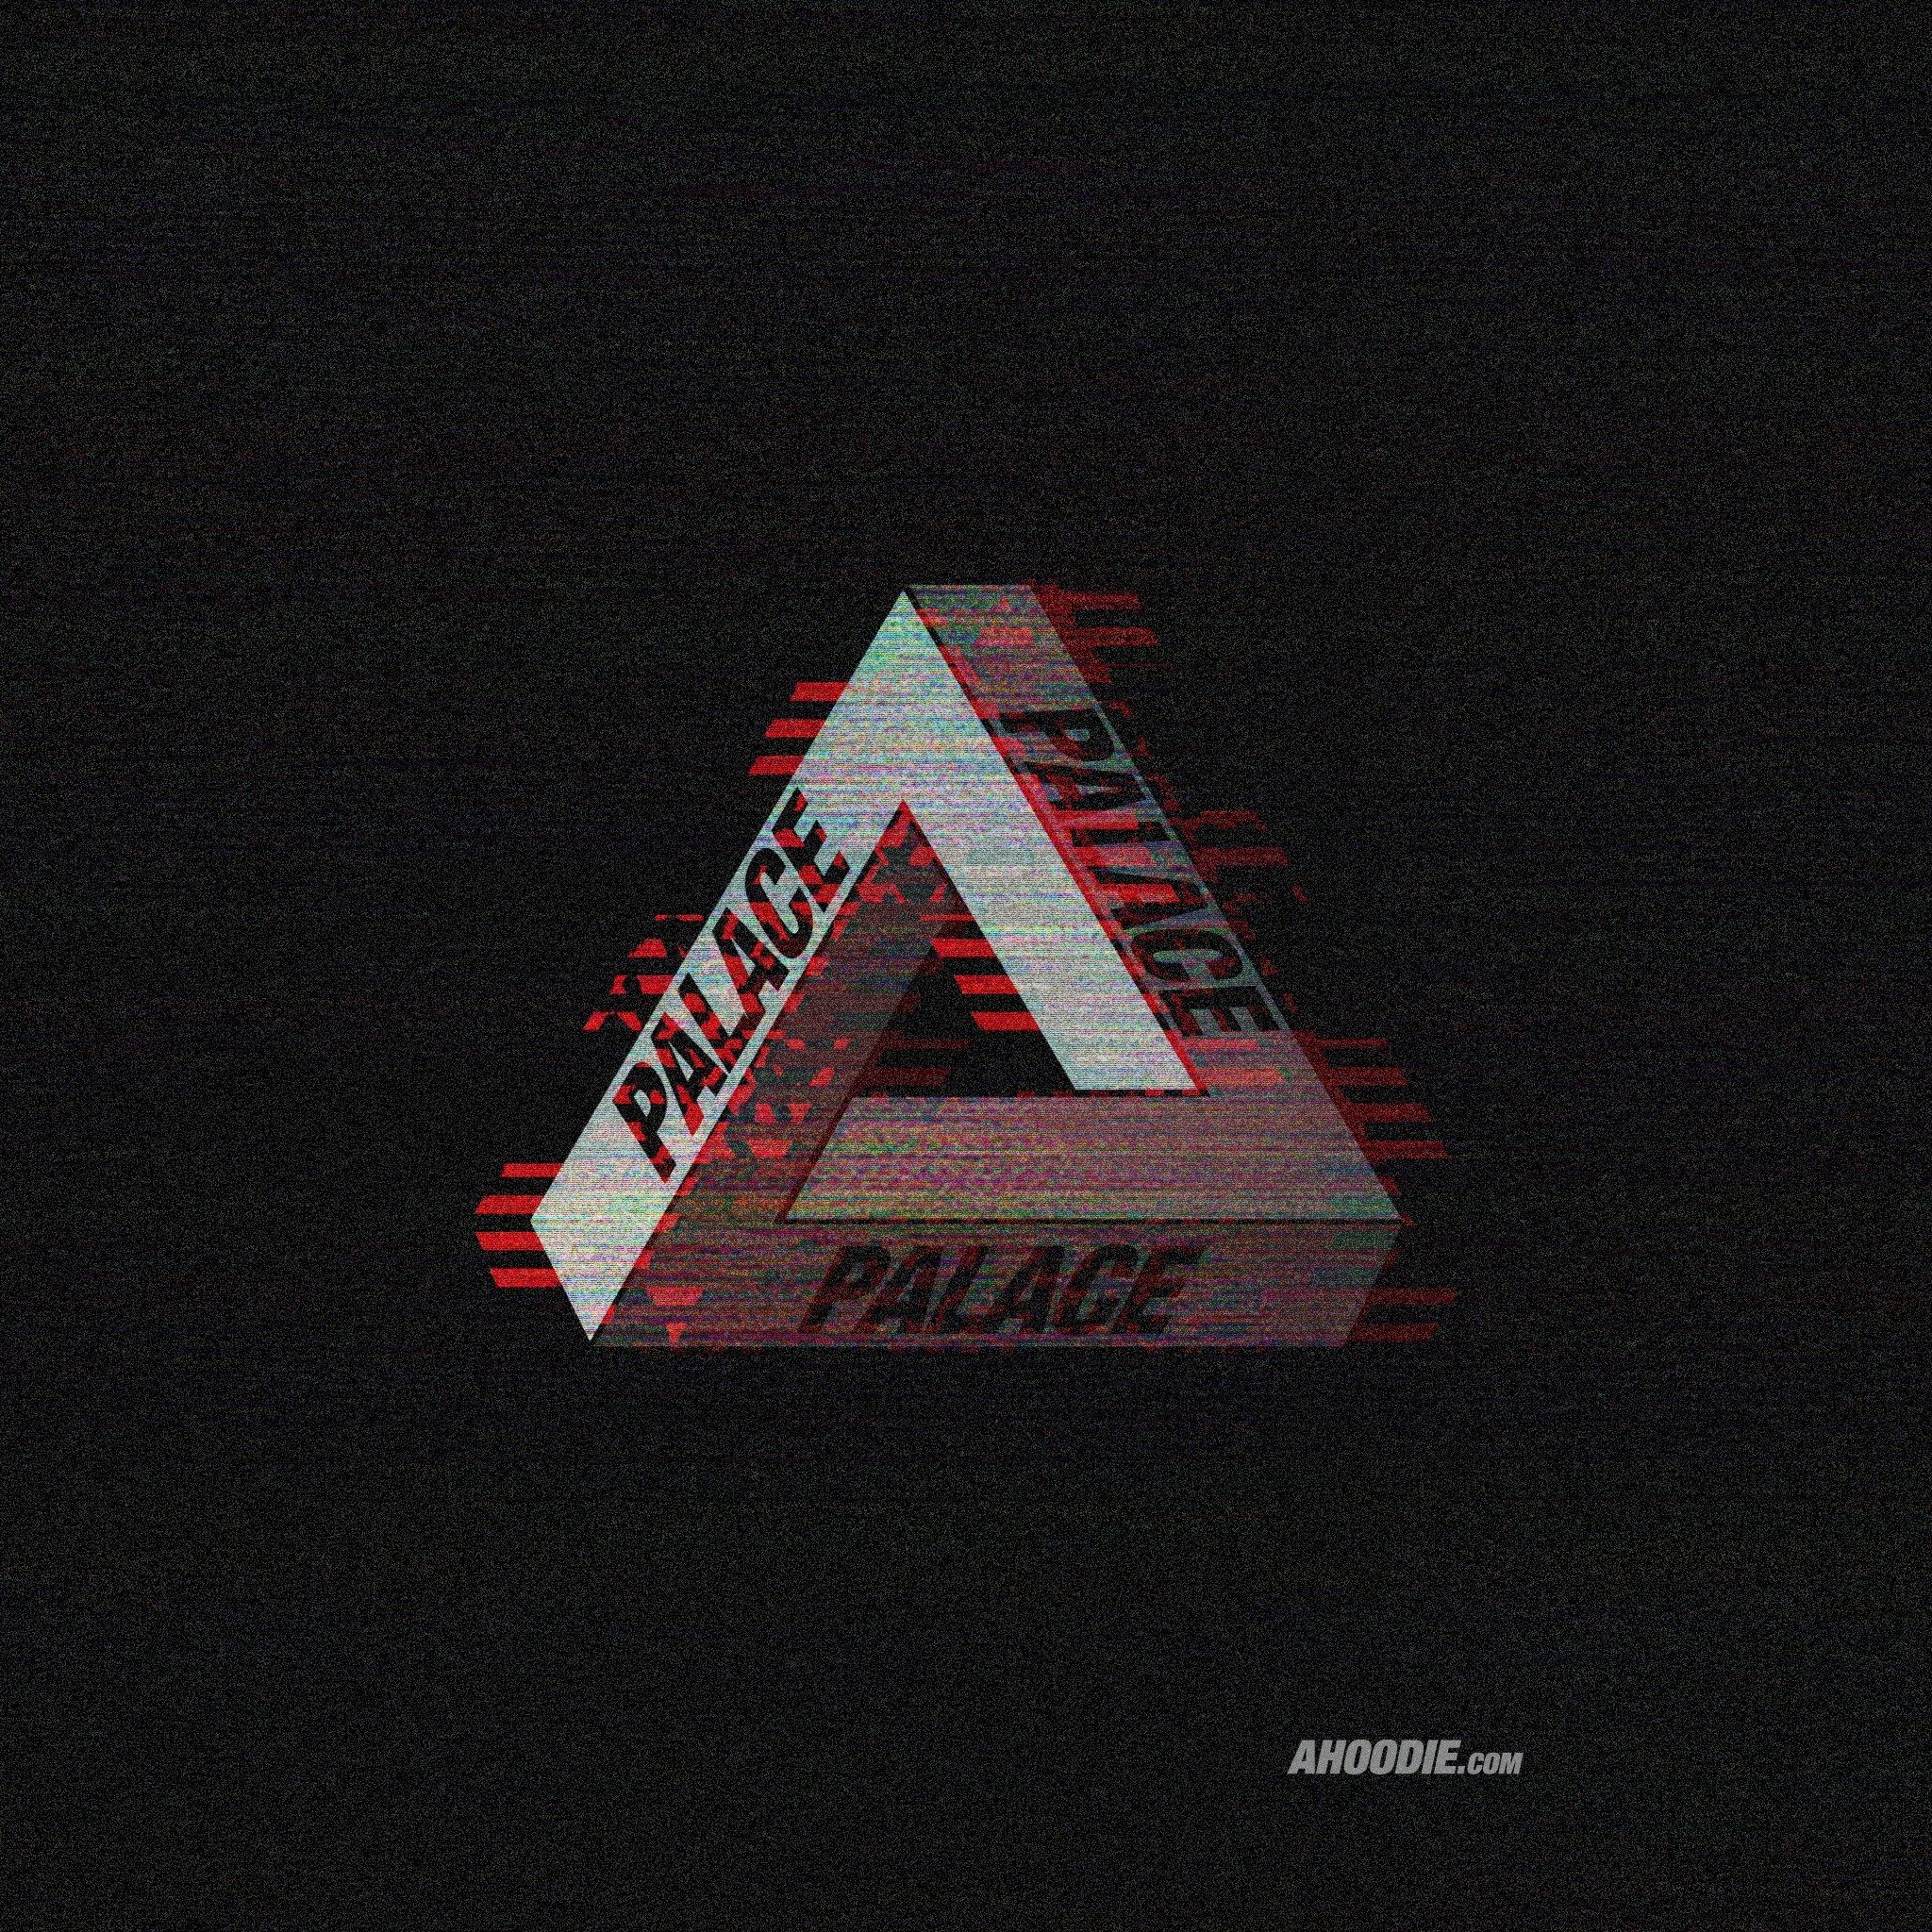 Ahoodie Palace Skateboards Vhs Glitch Wallpaper 852 Wallpaper